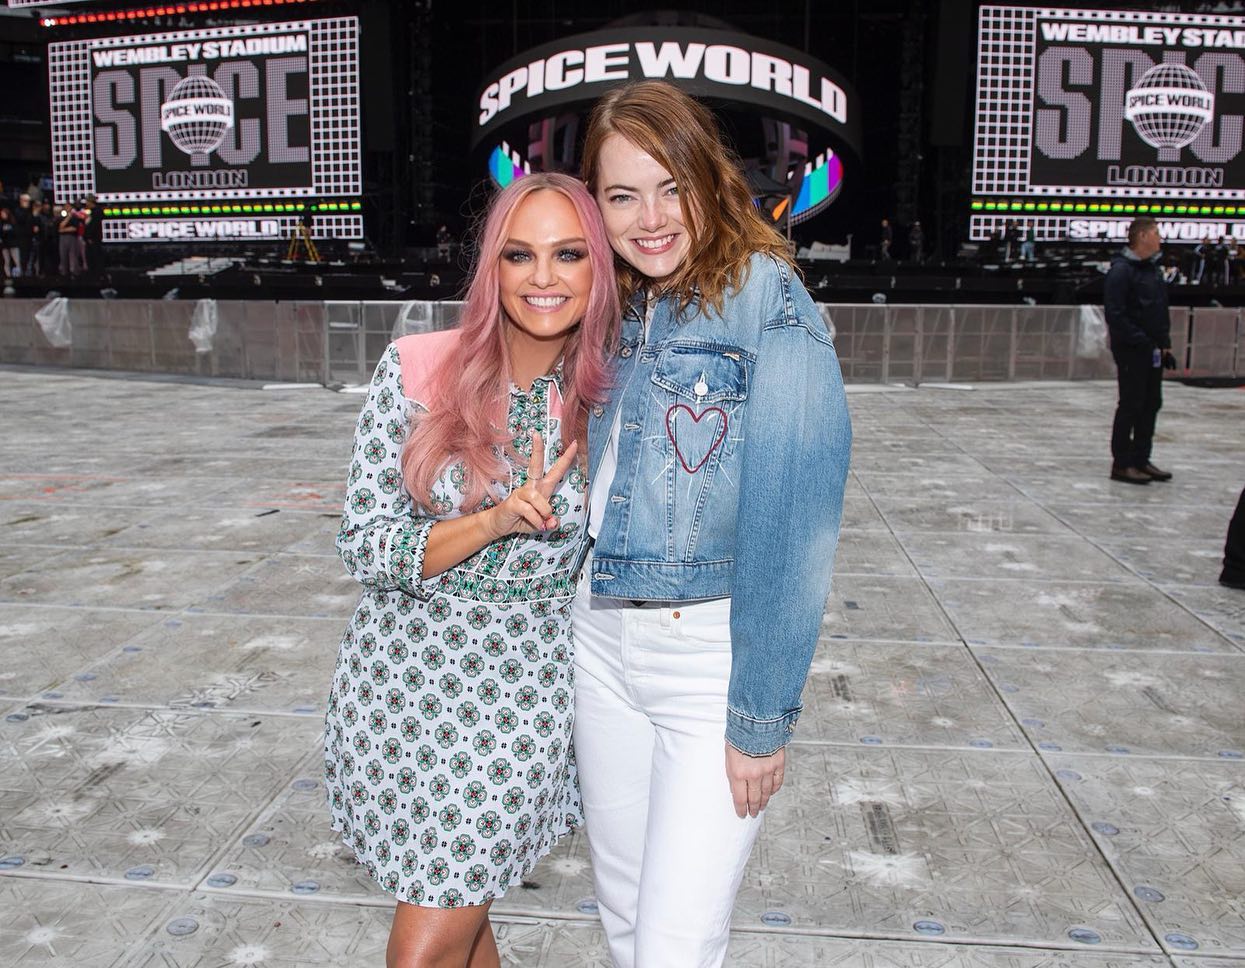 The actress and Baby Spice singer posed together for a photo back in 2019